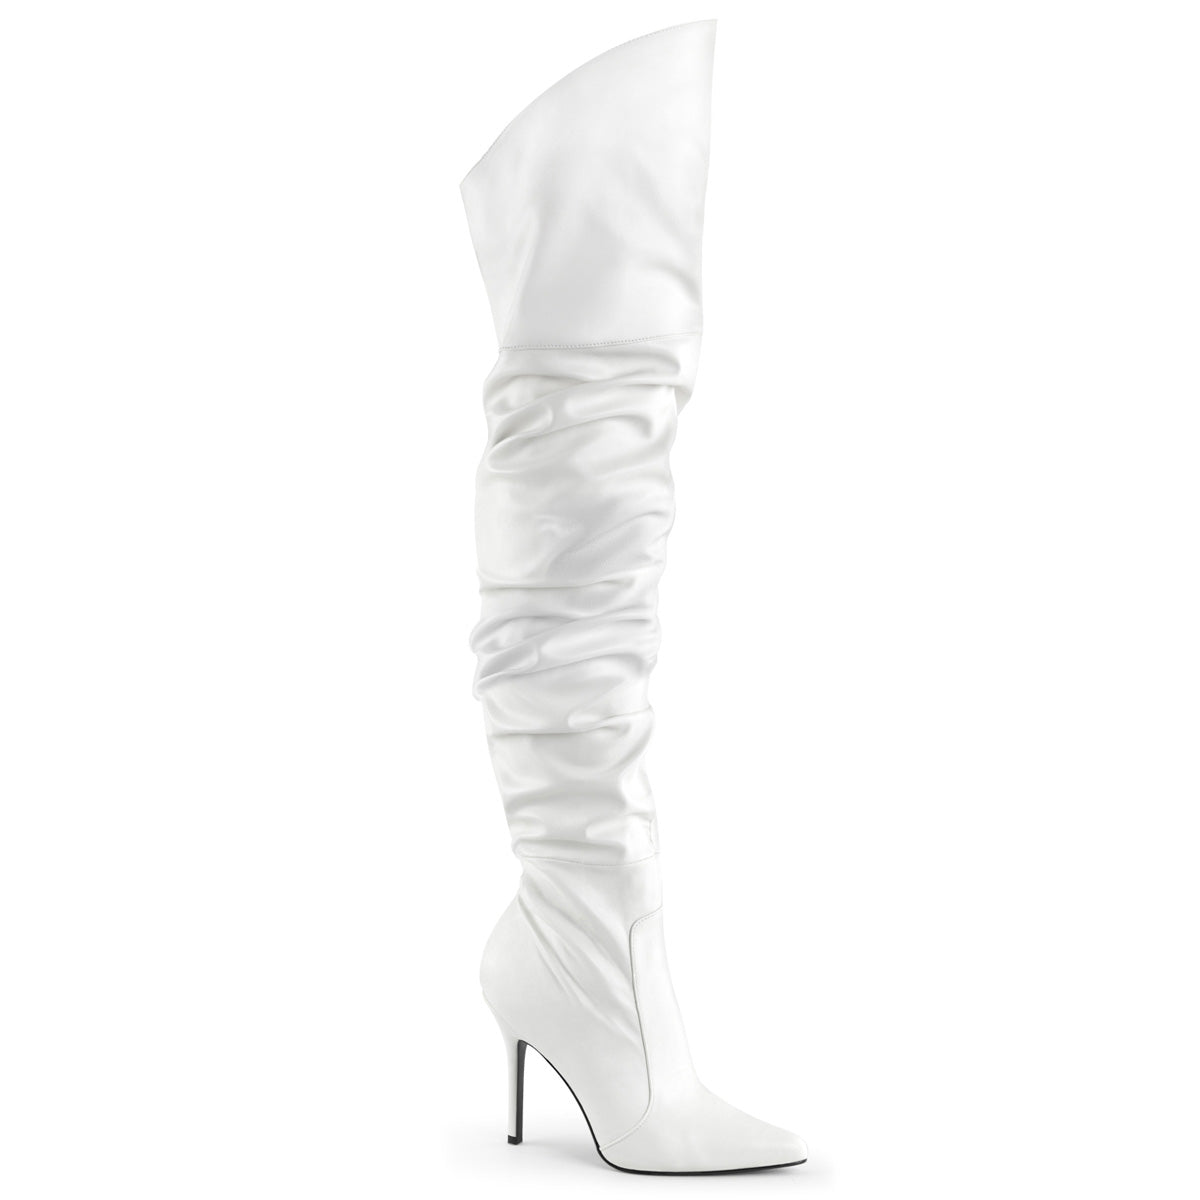 CLASSIQUE-3011 Pleaser 4 Inch Heel White Fetish Footwear-Pleaser- Sexy Shoes